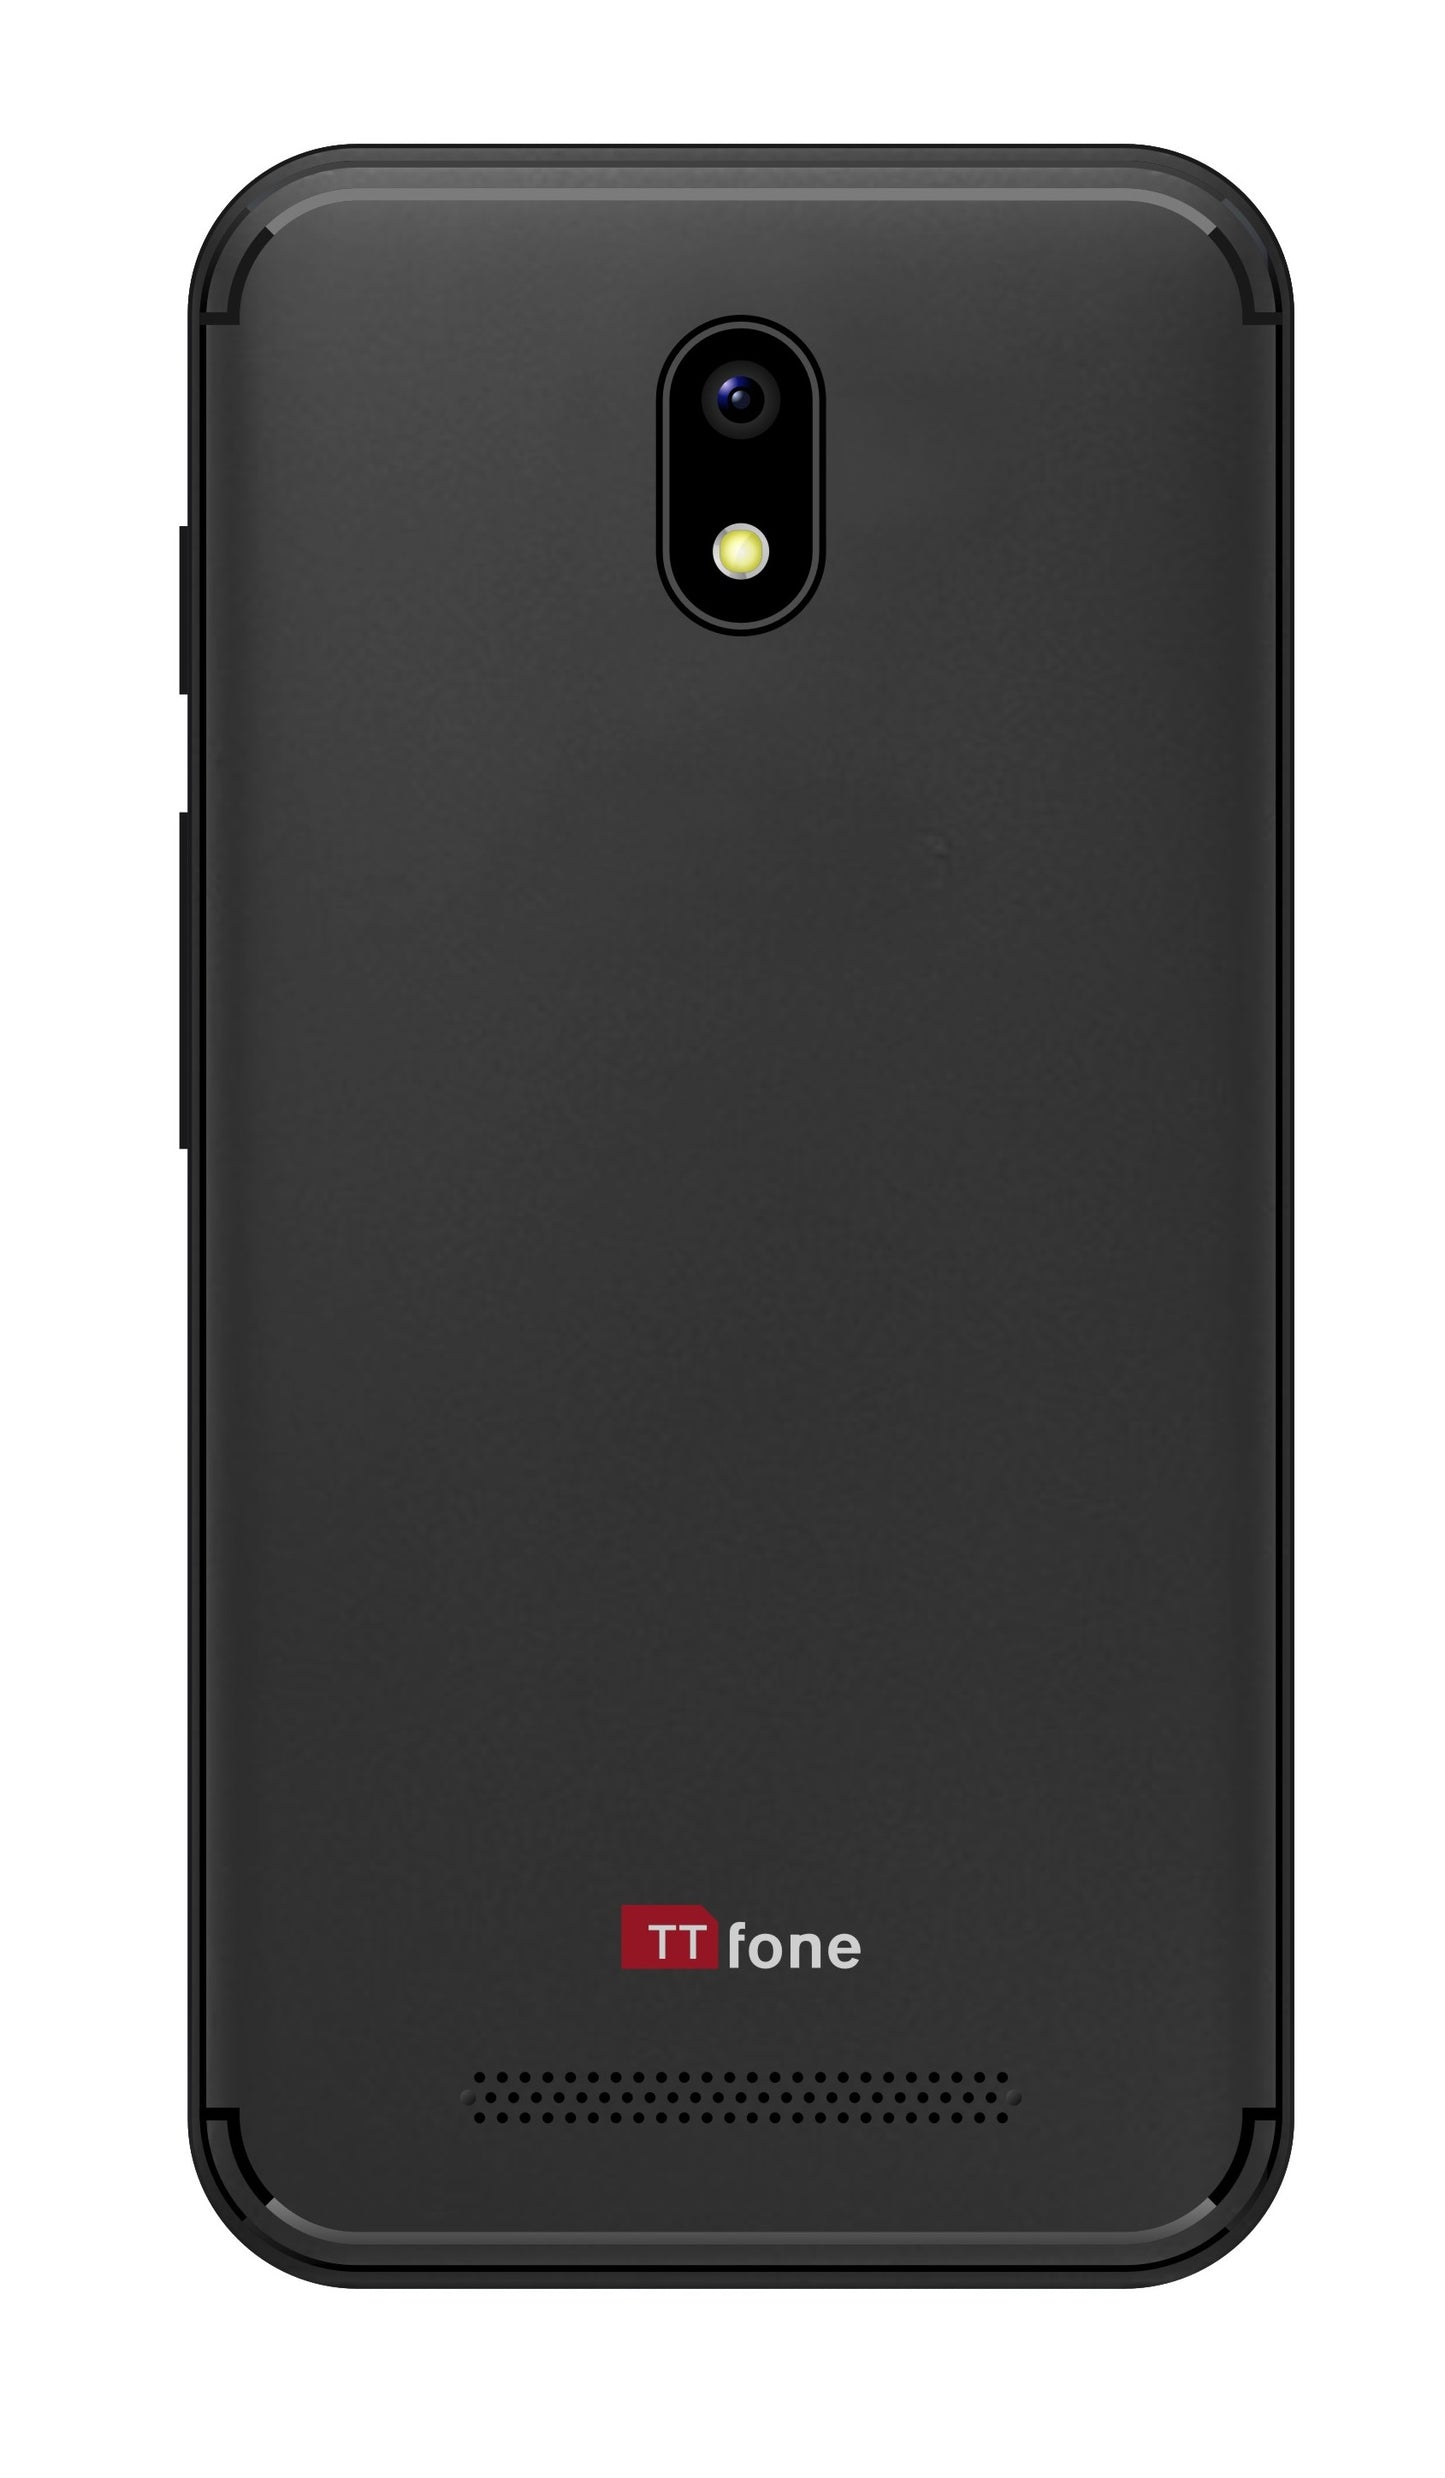 TTfone Black TT20 Dual SIM - Warehouse Deals with USB Cable and O2 Pay As You Go Sim Card